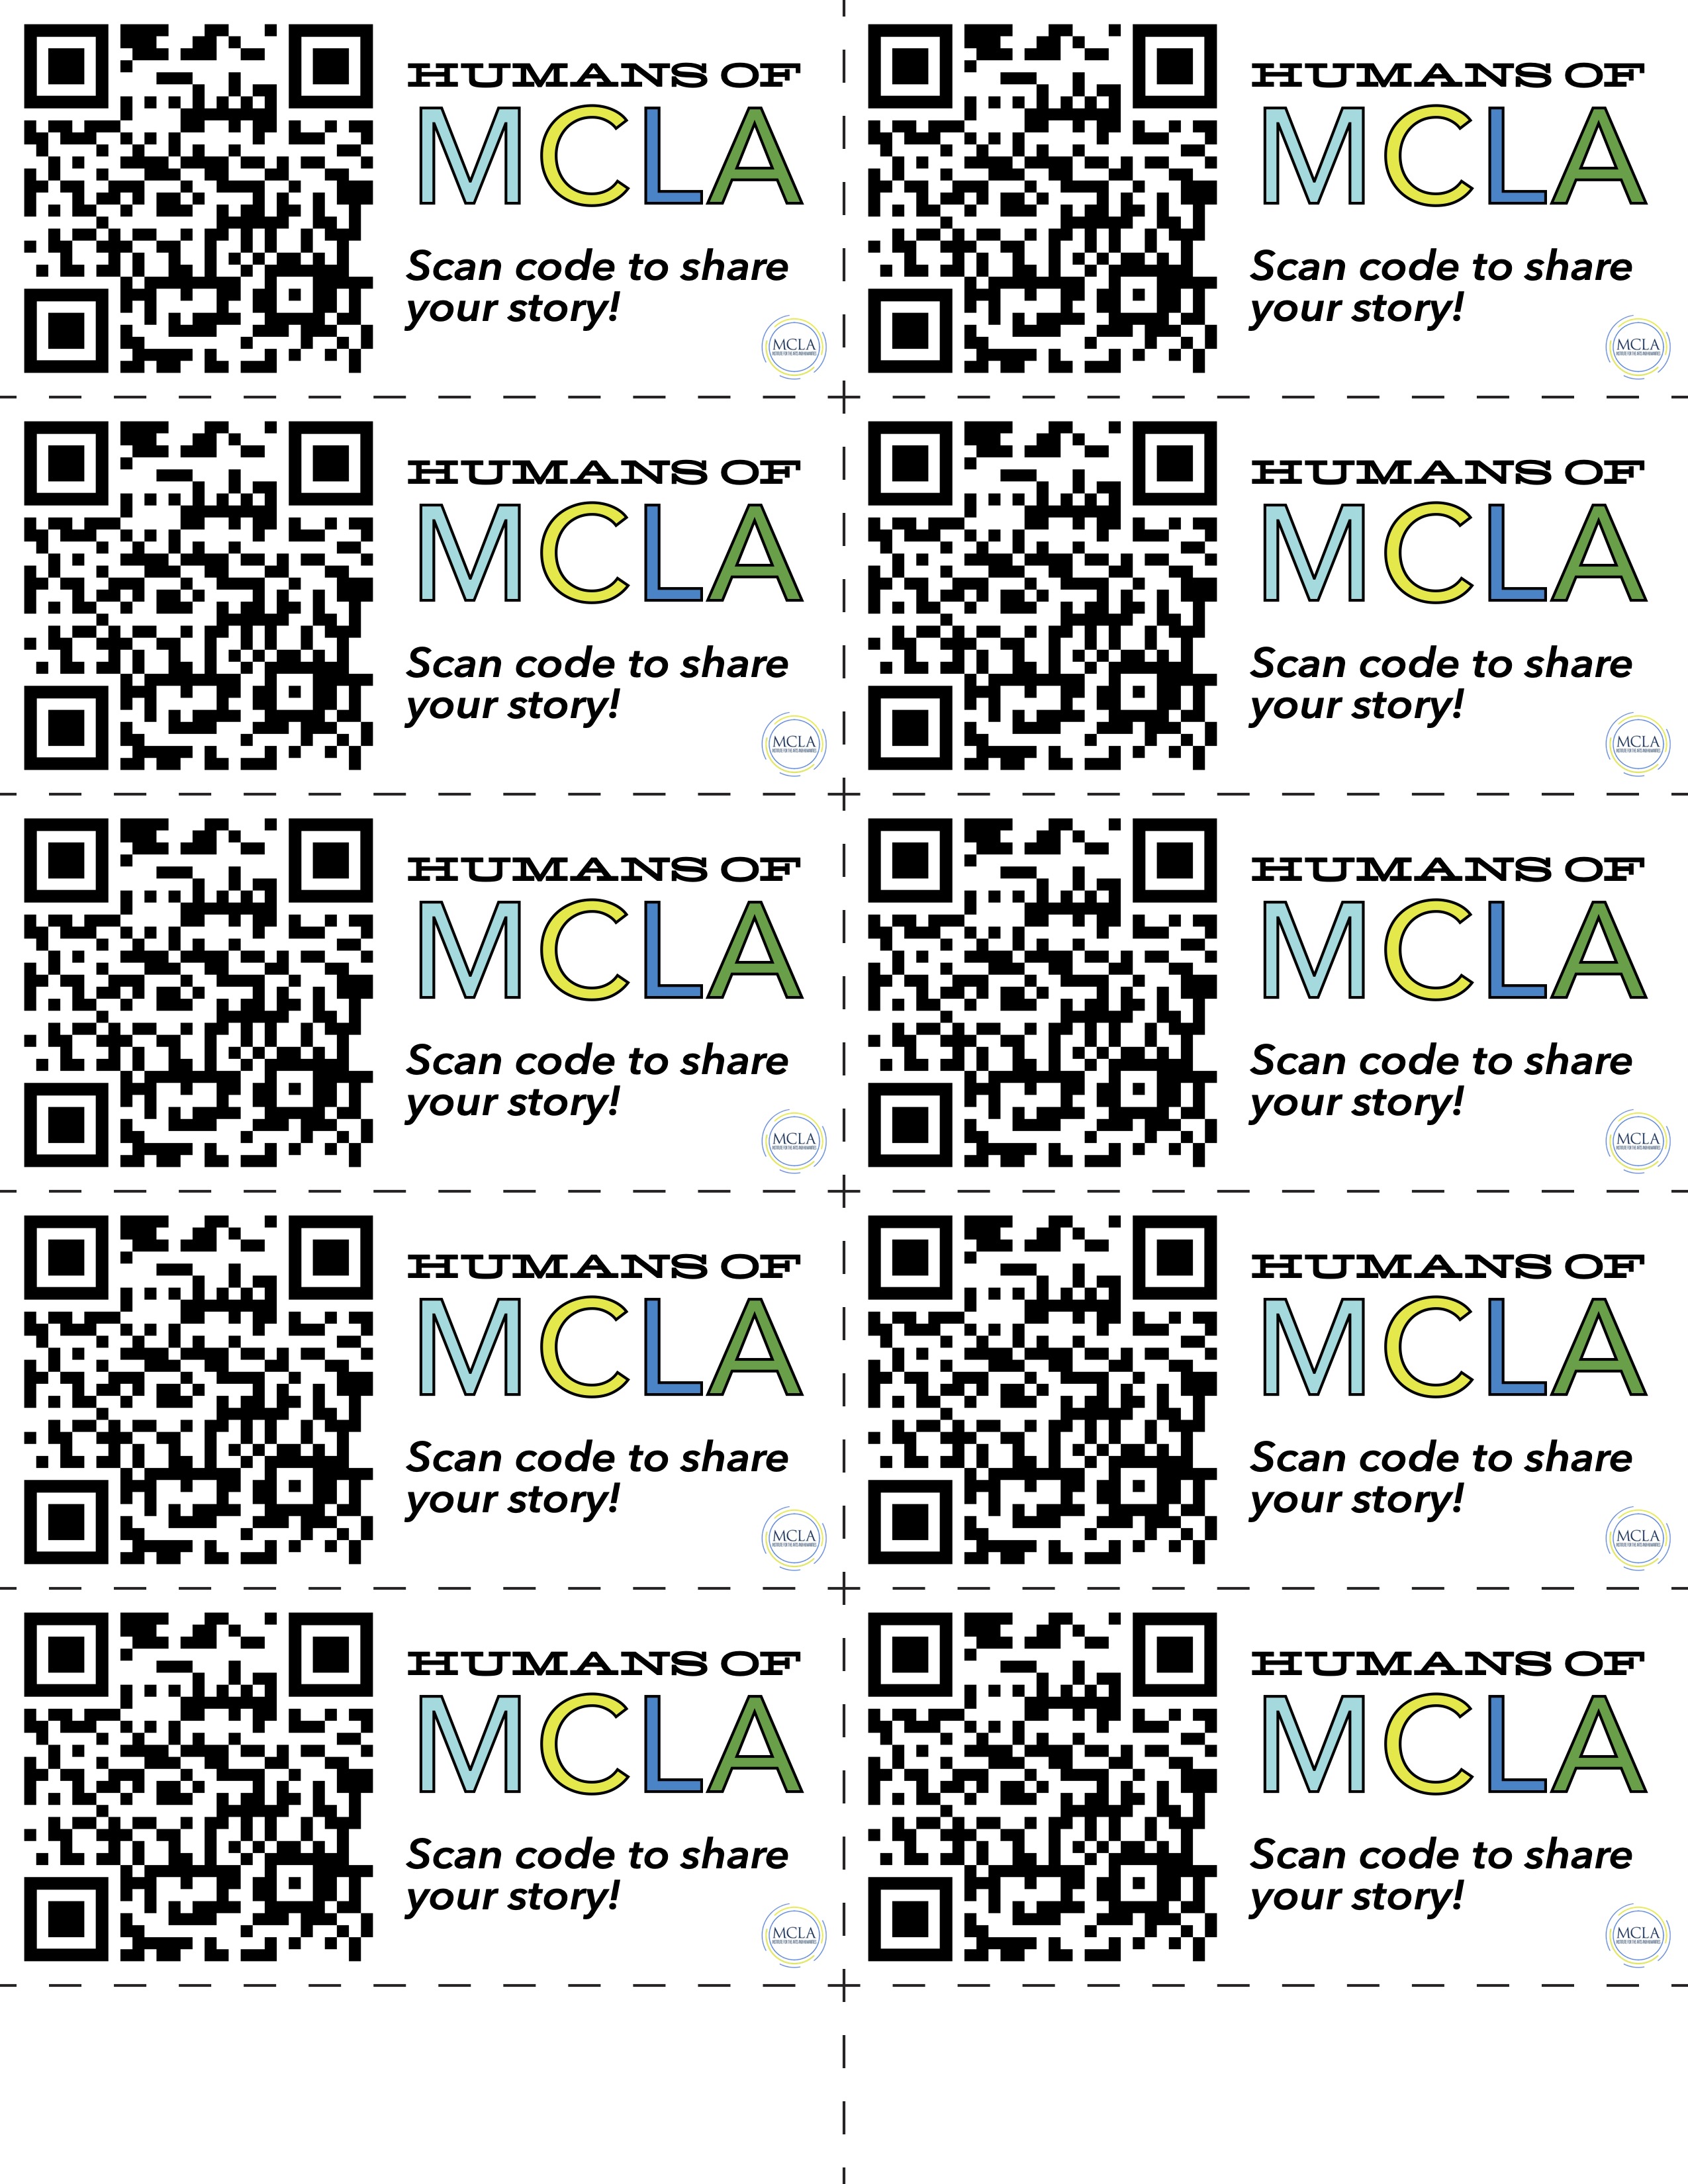 Page of strips with a QR code and the text Scan code to share your story!